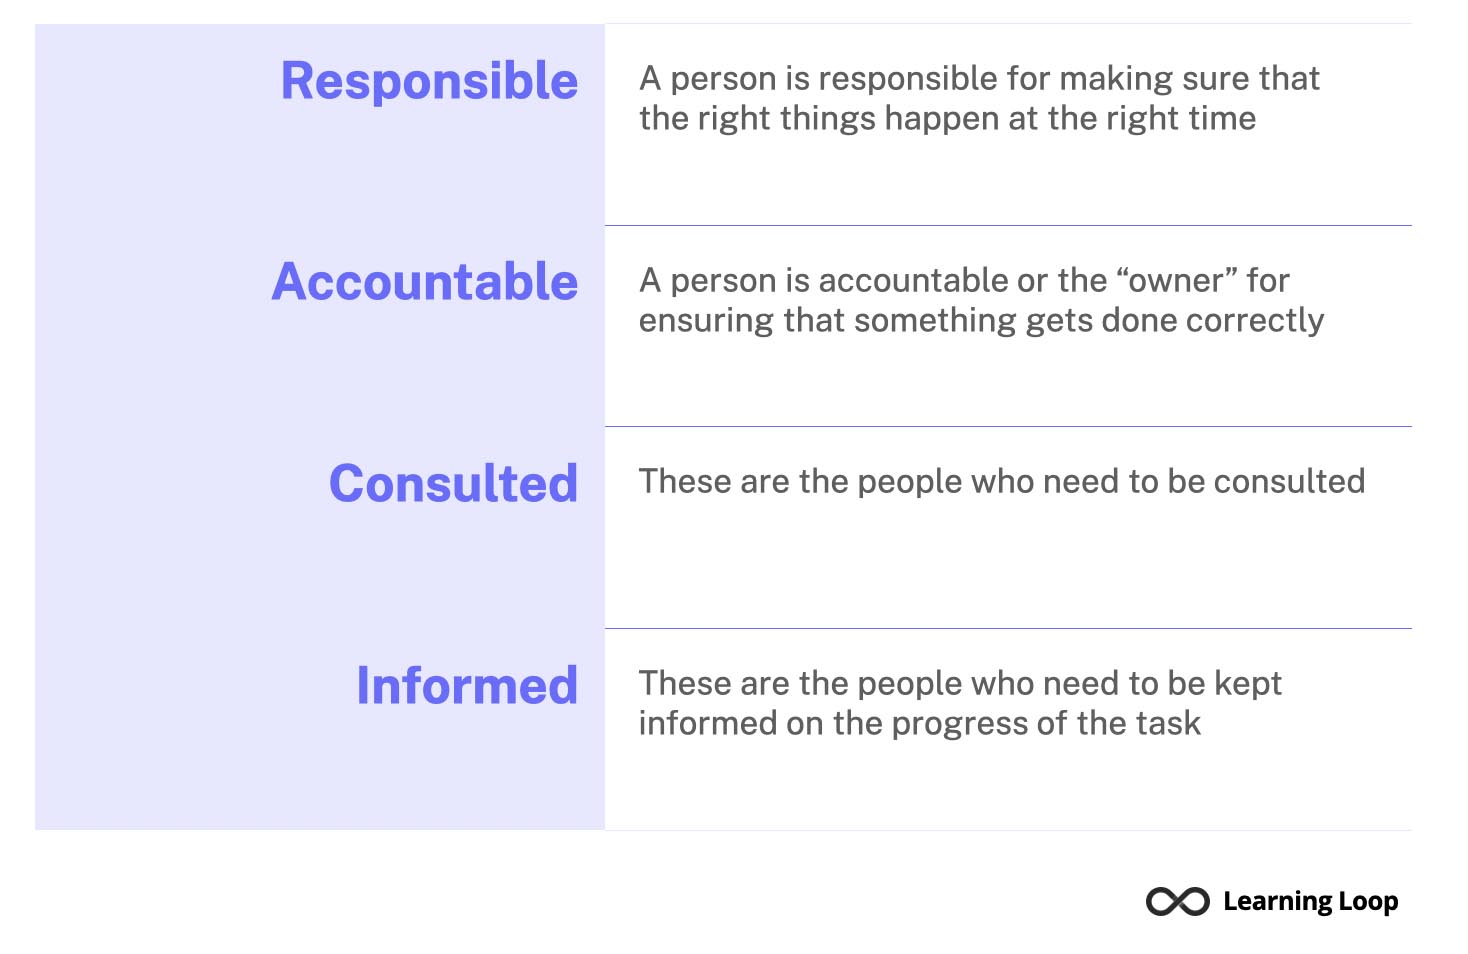 The RACI Matrix stands for Responsible, Accountable, Consulted, and Informed